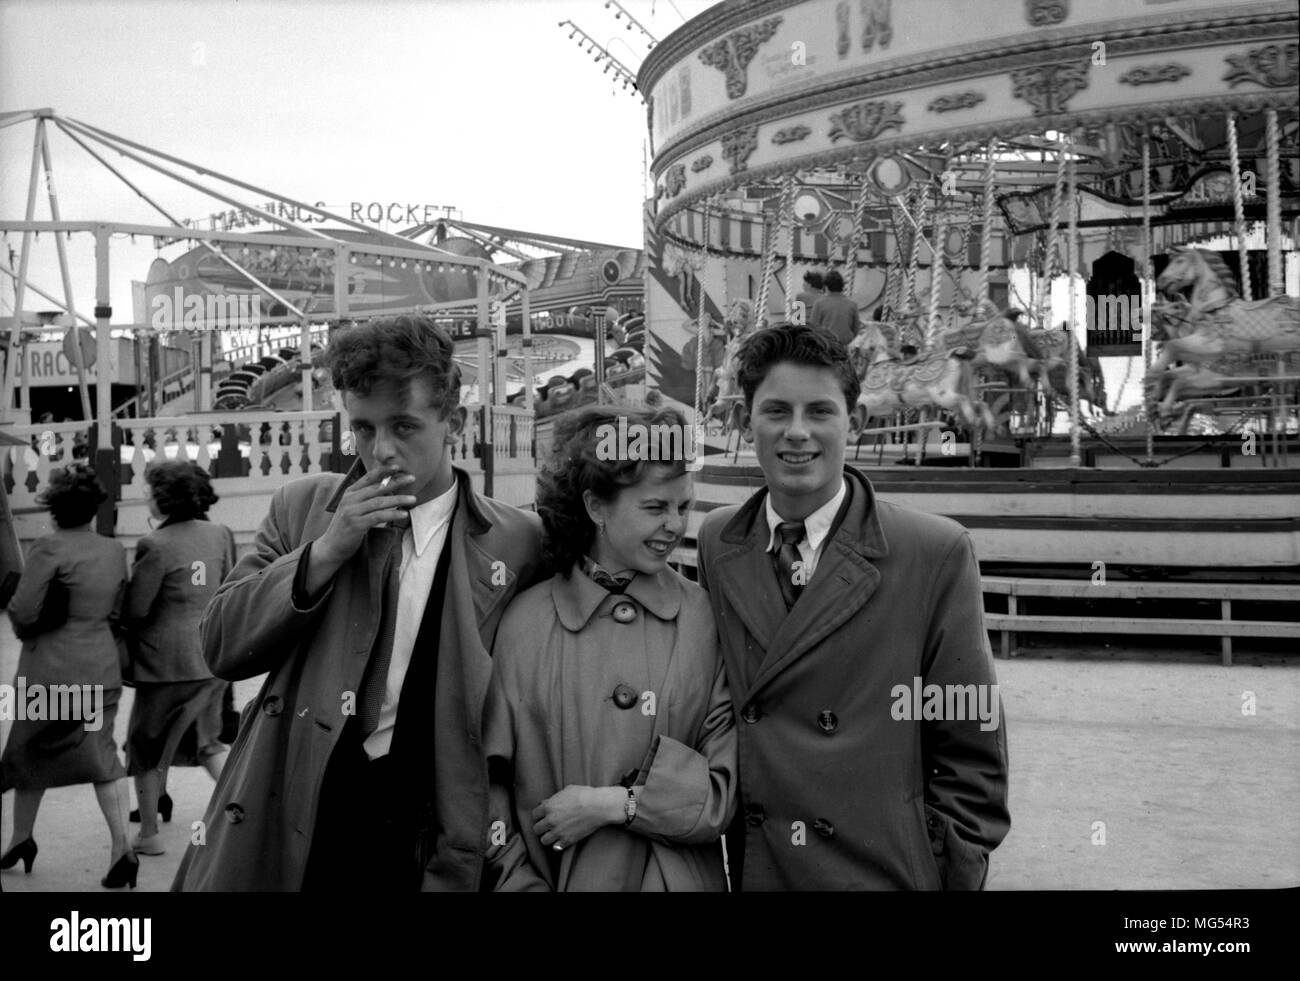 3 well dressed fashionable teenagers, 2 boys and a girl, on a cold day at a British funfair in the 1950s, one is smoking a cigarette. Stock Photo